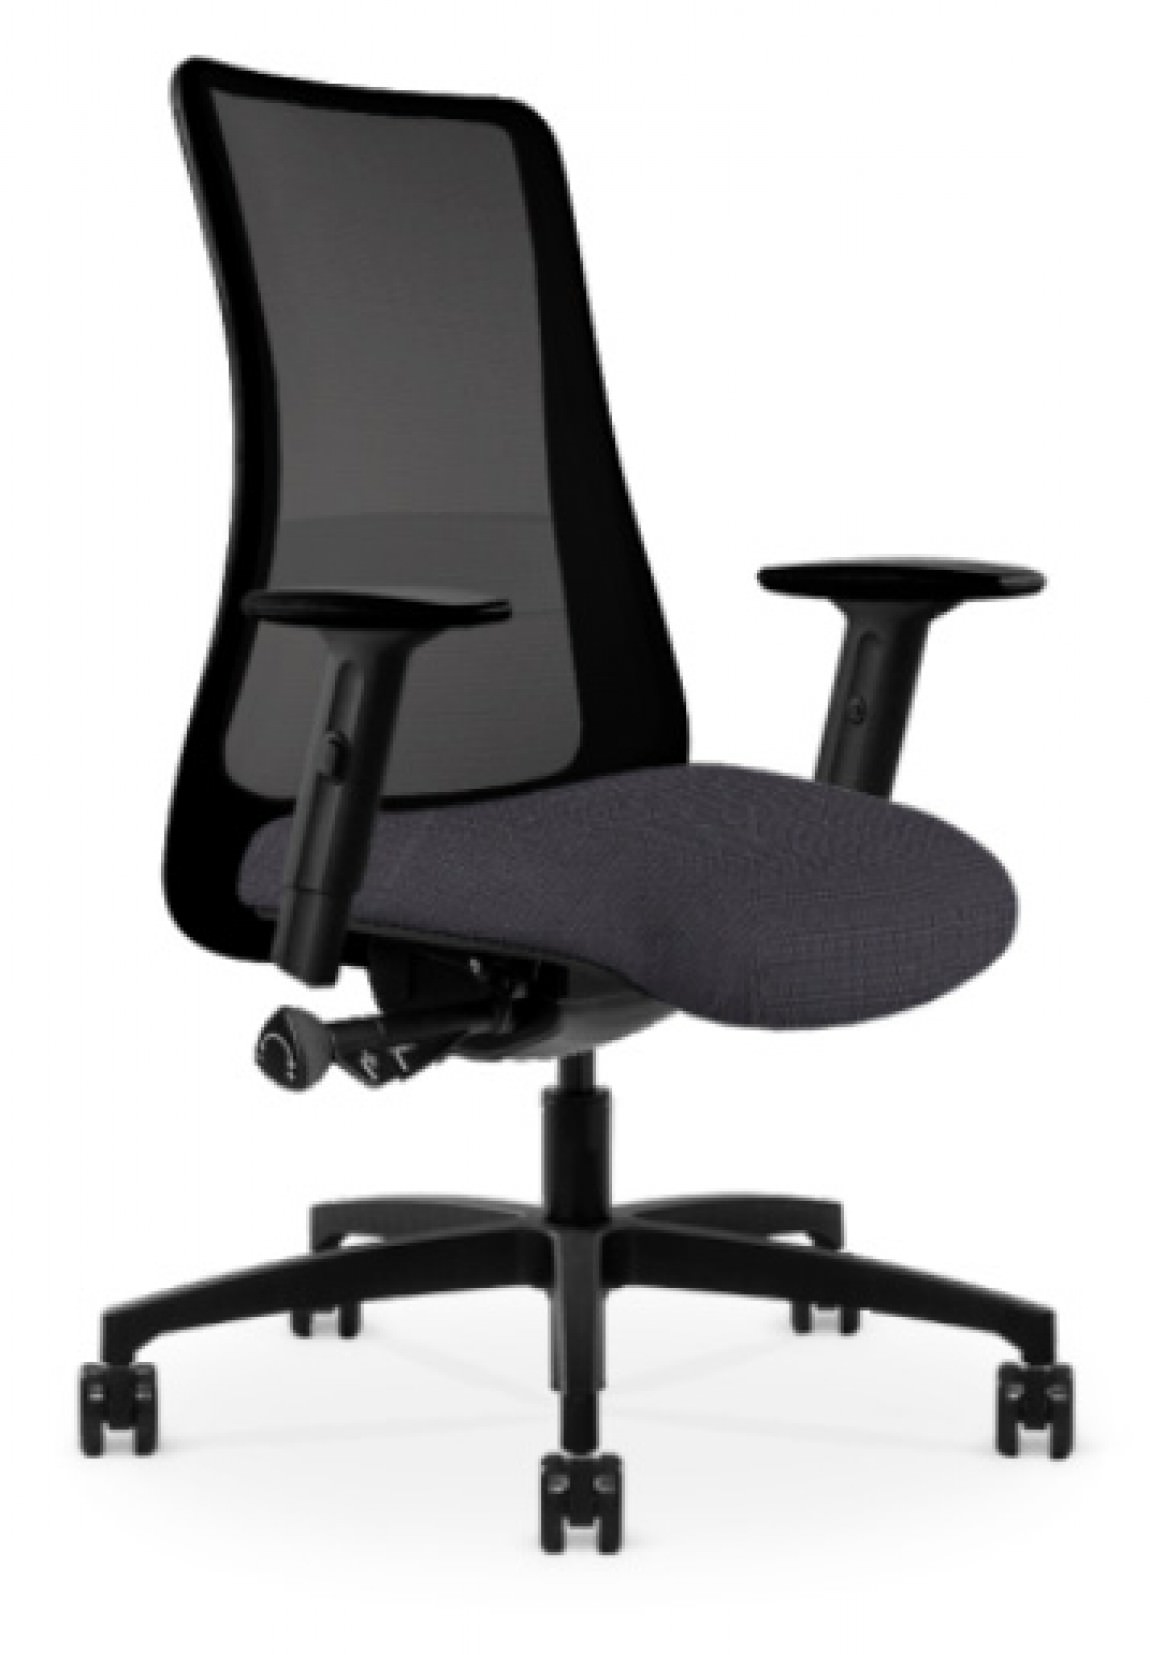 Black Copper Mesh Antimicrobial Office Chair w/ Dark Gray Seat